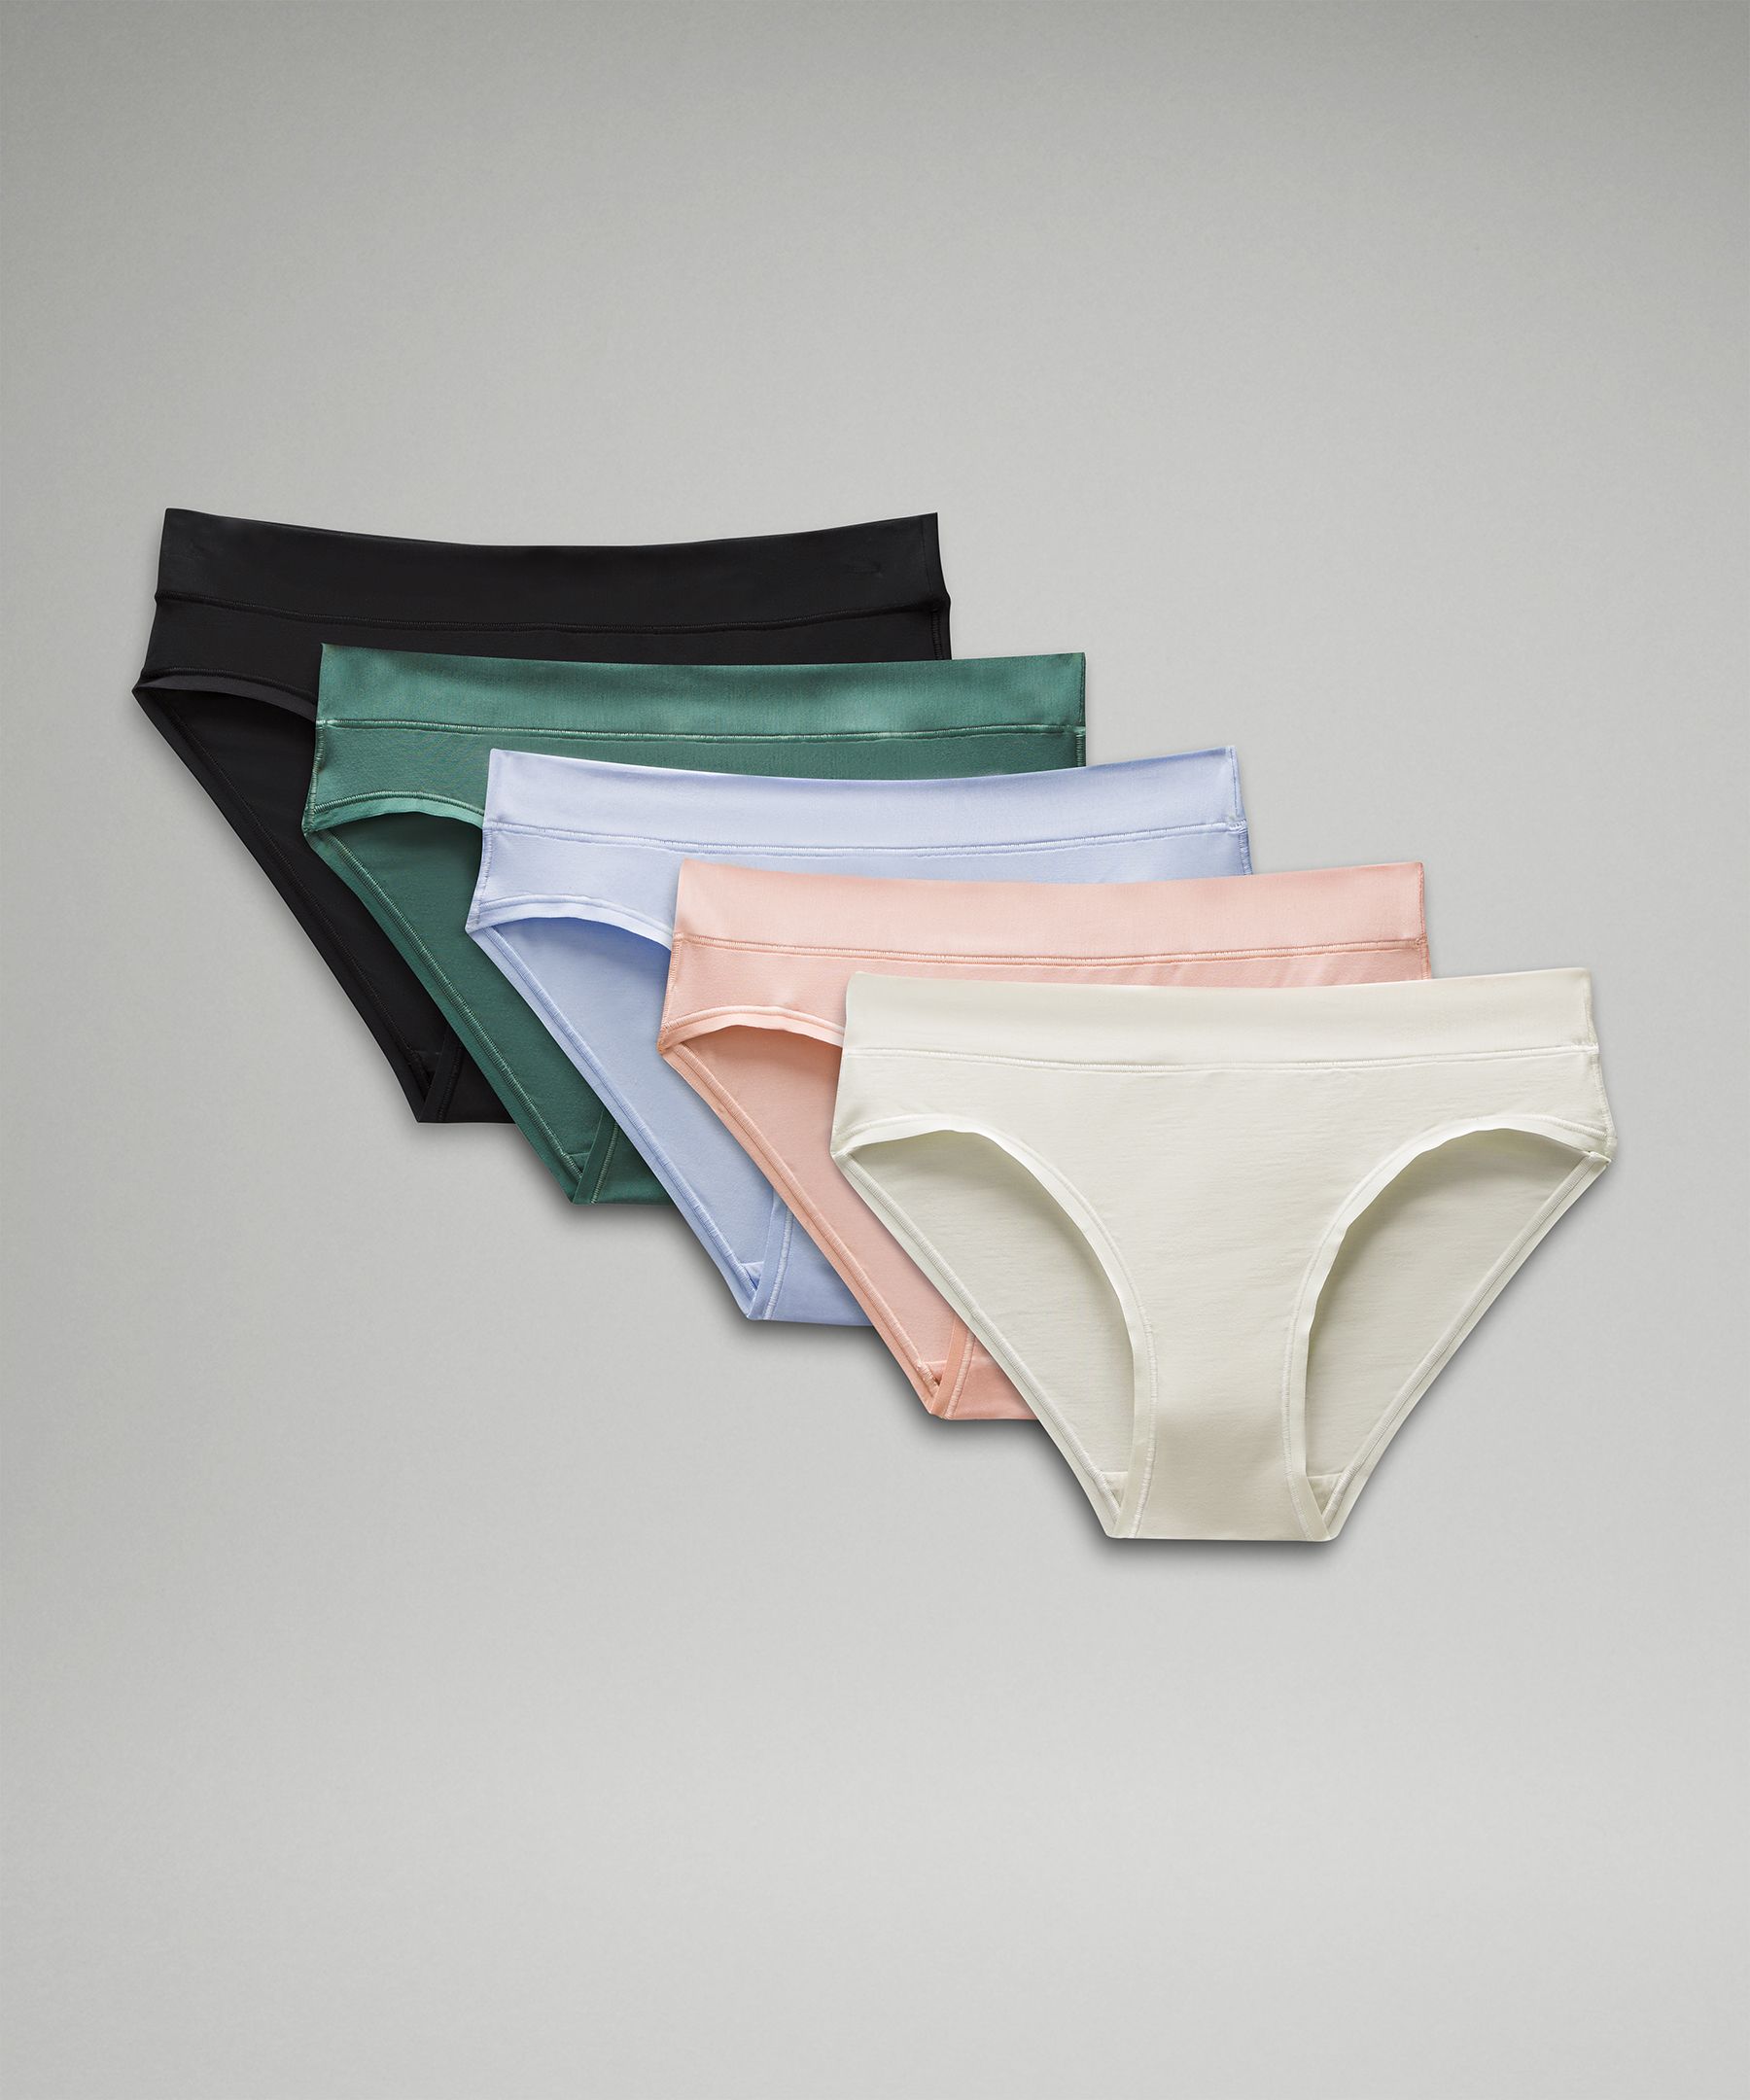 Lululemon UnderEase Mid-Rise Hipsters NEW Underwear 3 pack XLarge